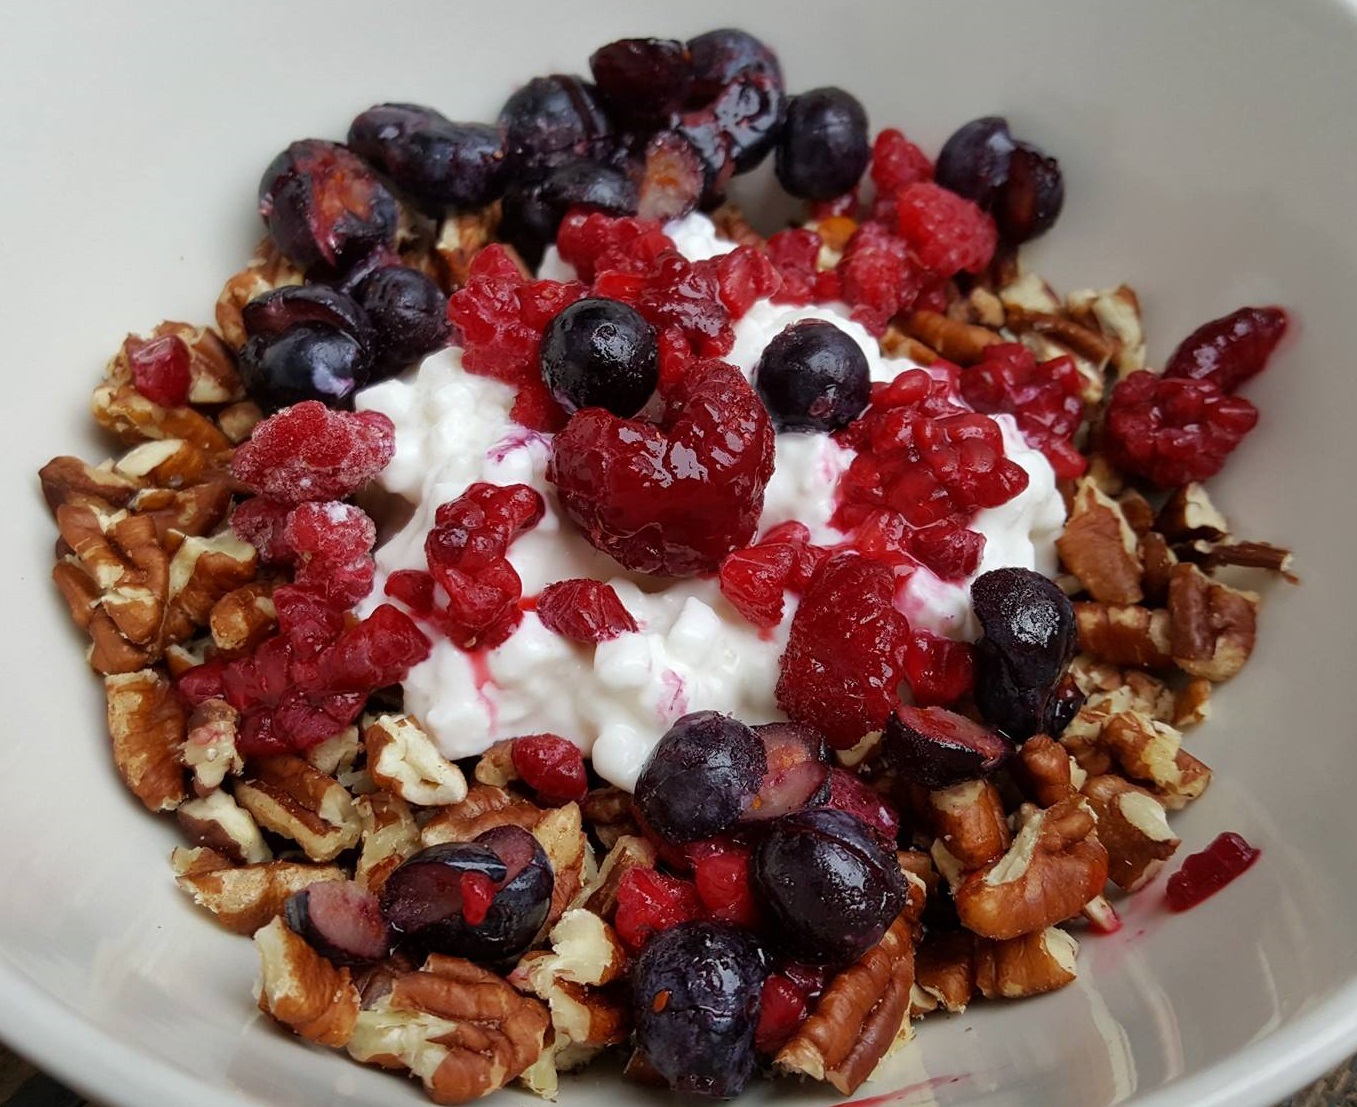 LCHF Breakfast with Pecans and Berries